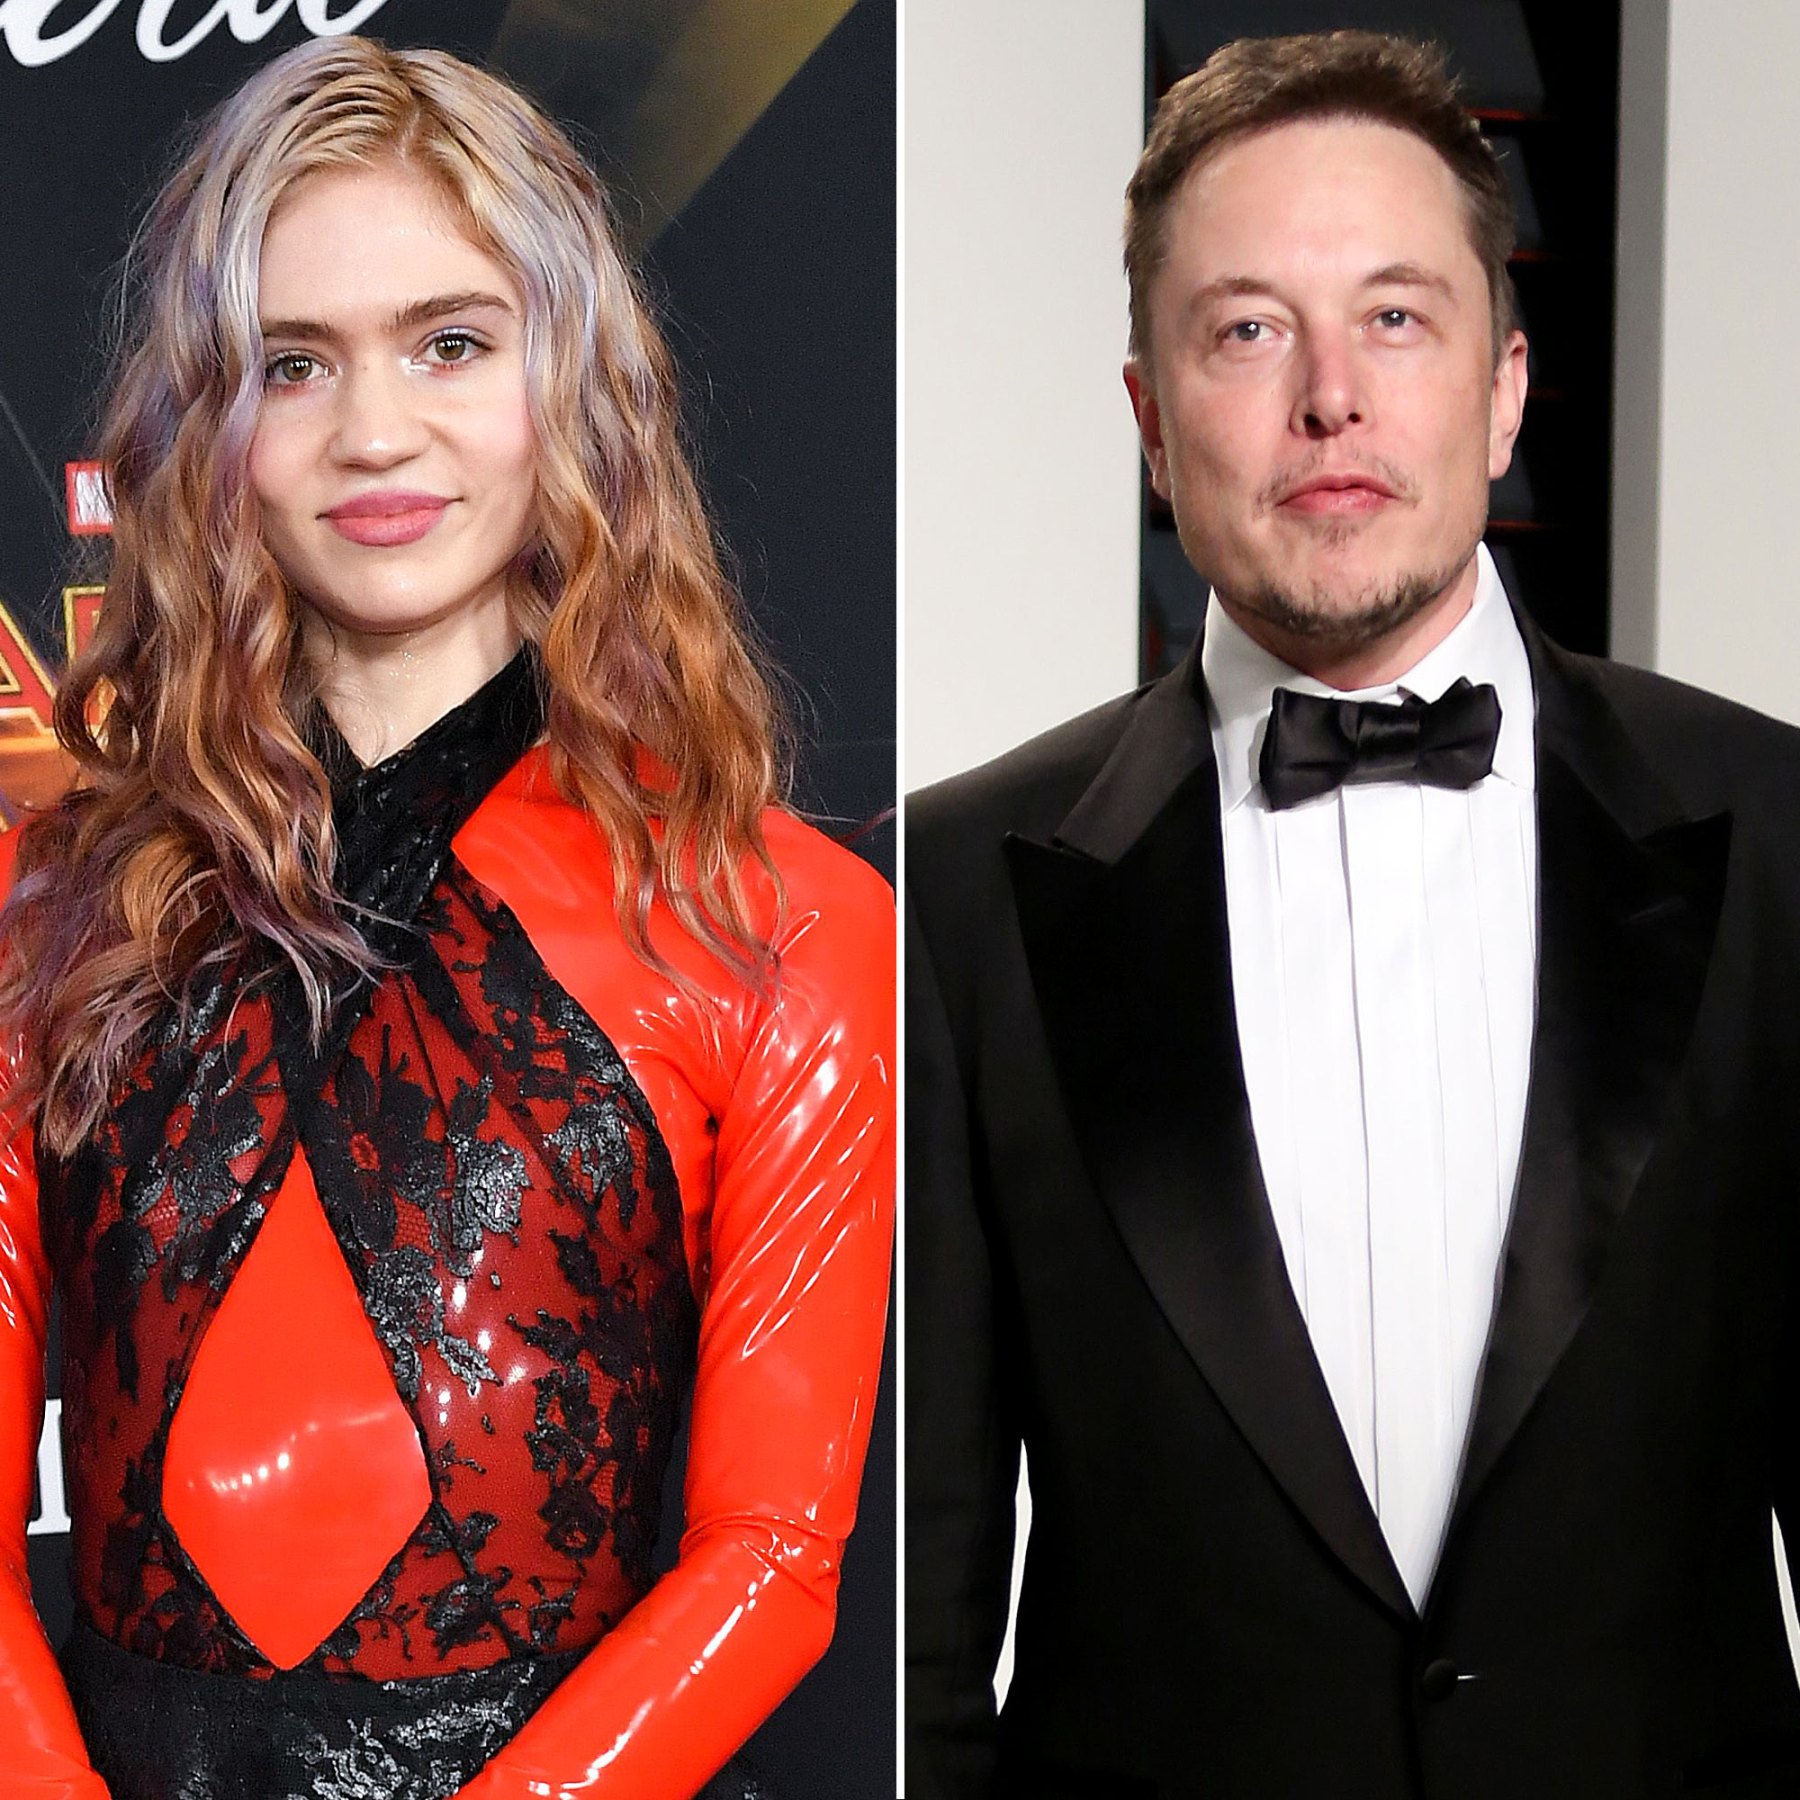 Grimes, Elon Musk Live Separately, Have 'Very Fluid' Relationship